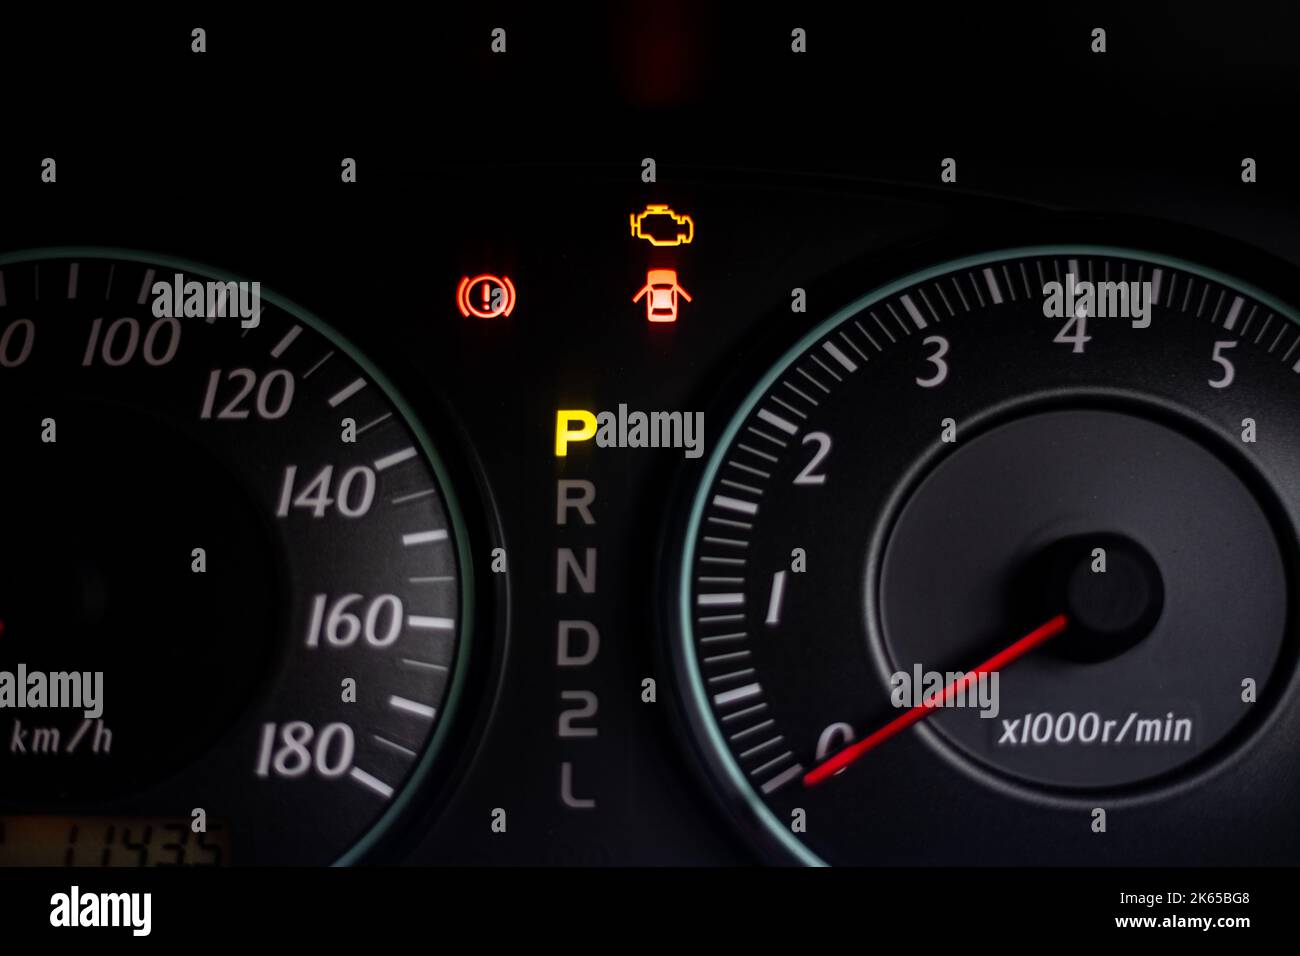 The warning lights of car engine check, door opened, parked and hand break in the speedometer of a vehicle Stock Photo